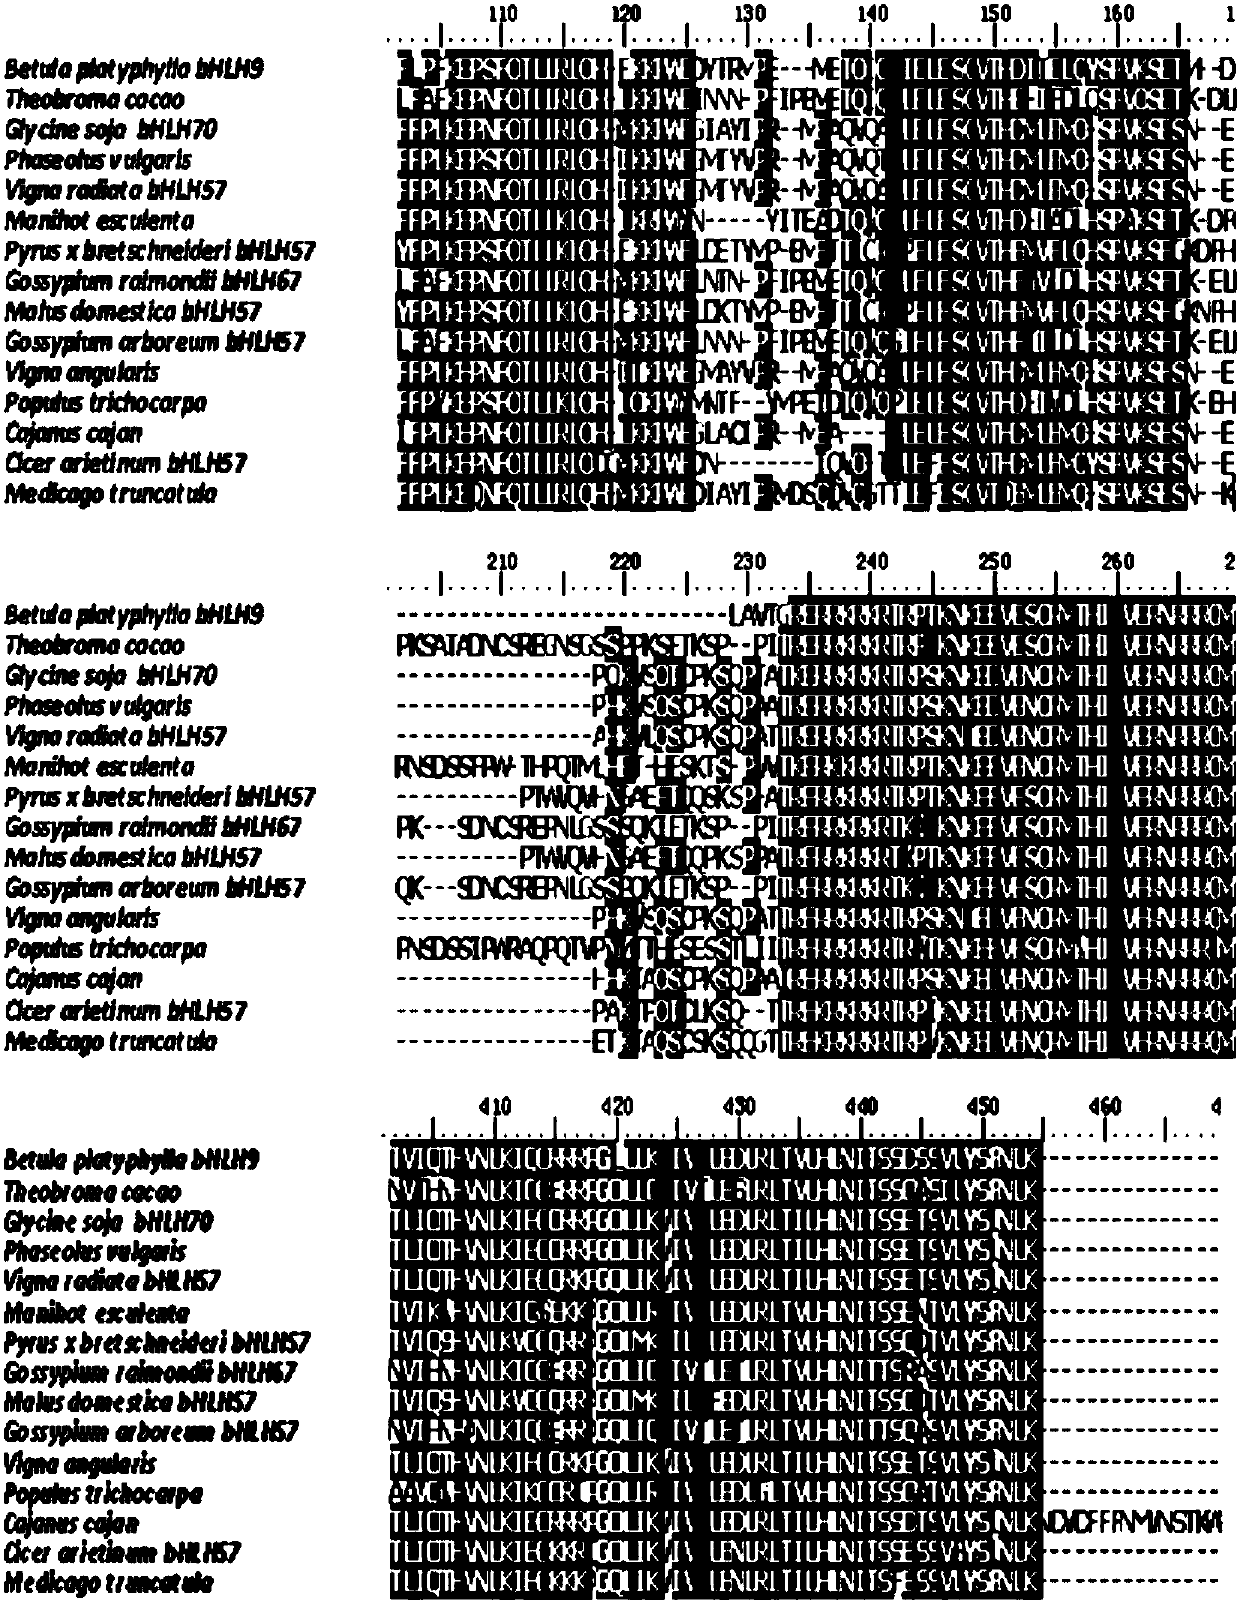 Application of betula platyphylla suk. bHLH9 protein in regulation of synthesis of triterpenoids